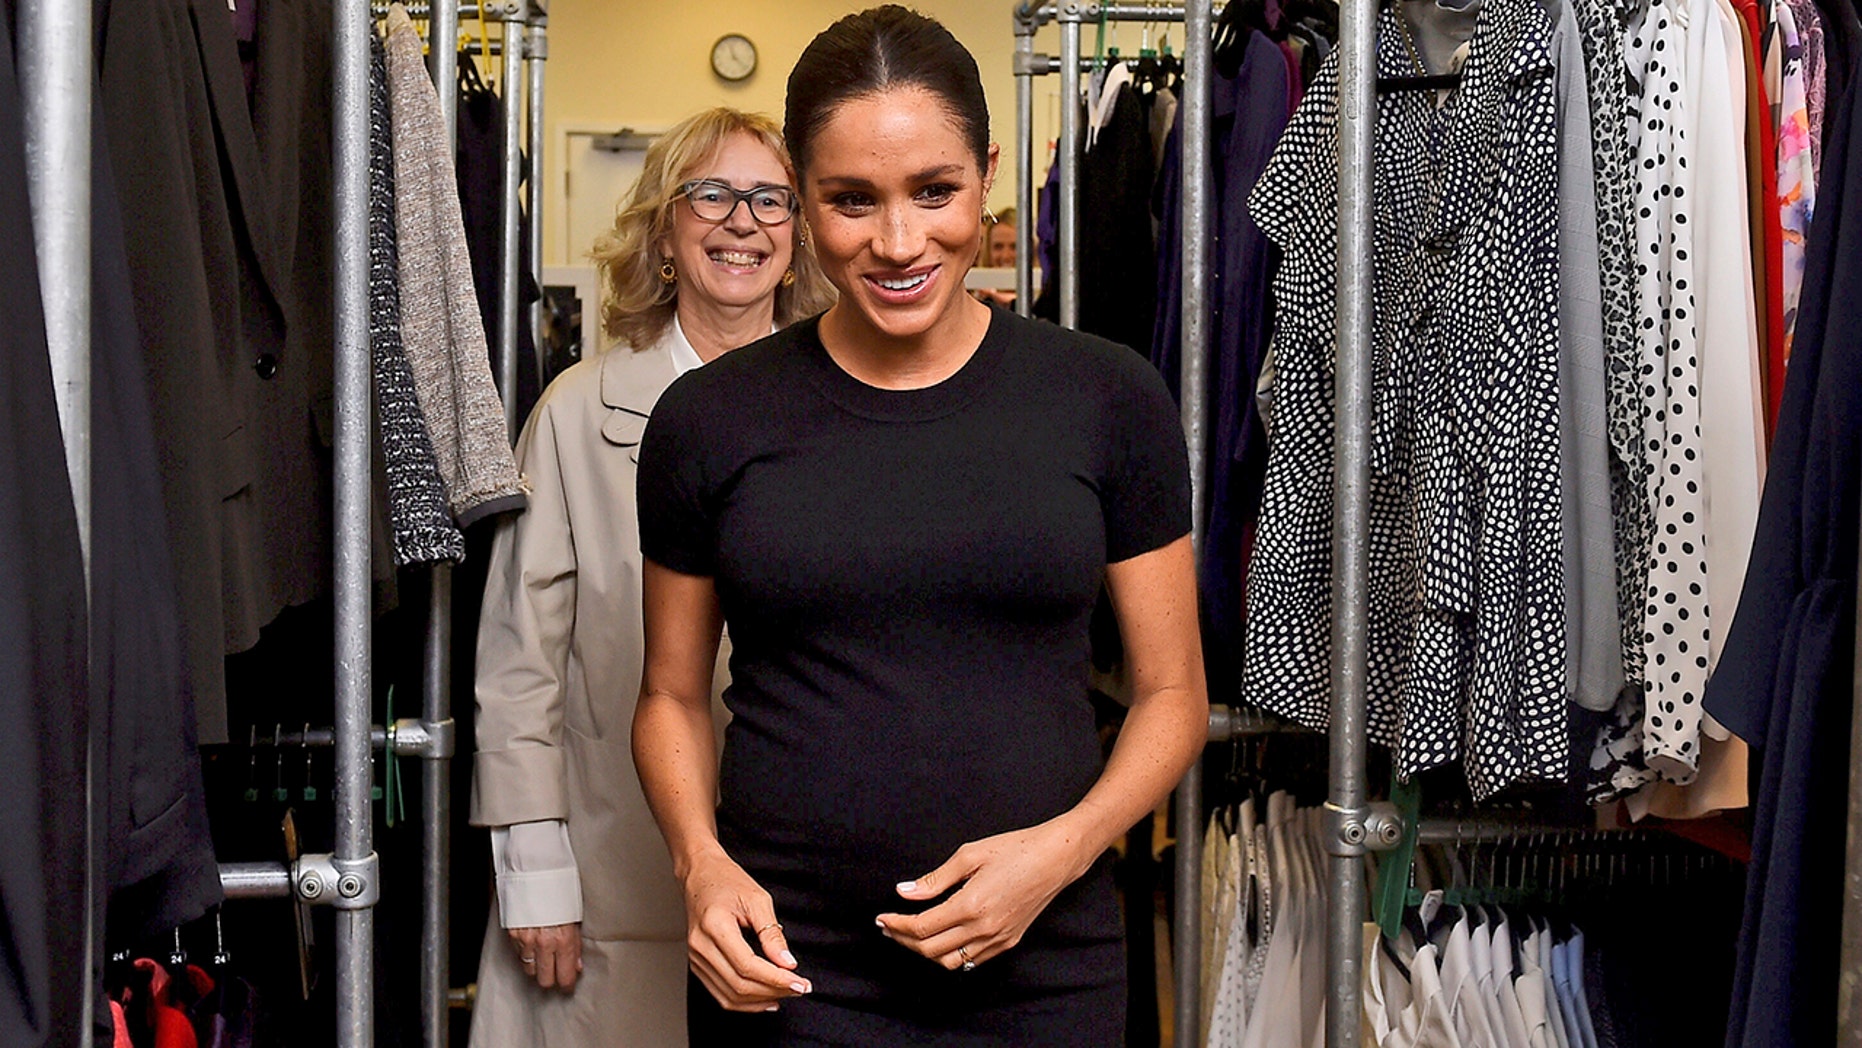 Meghan Markle announces royal patronages for the arts, women, education and animals